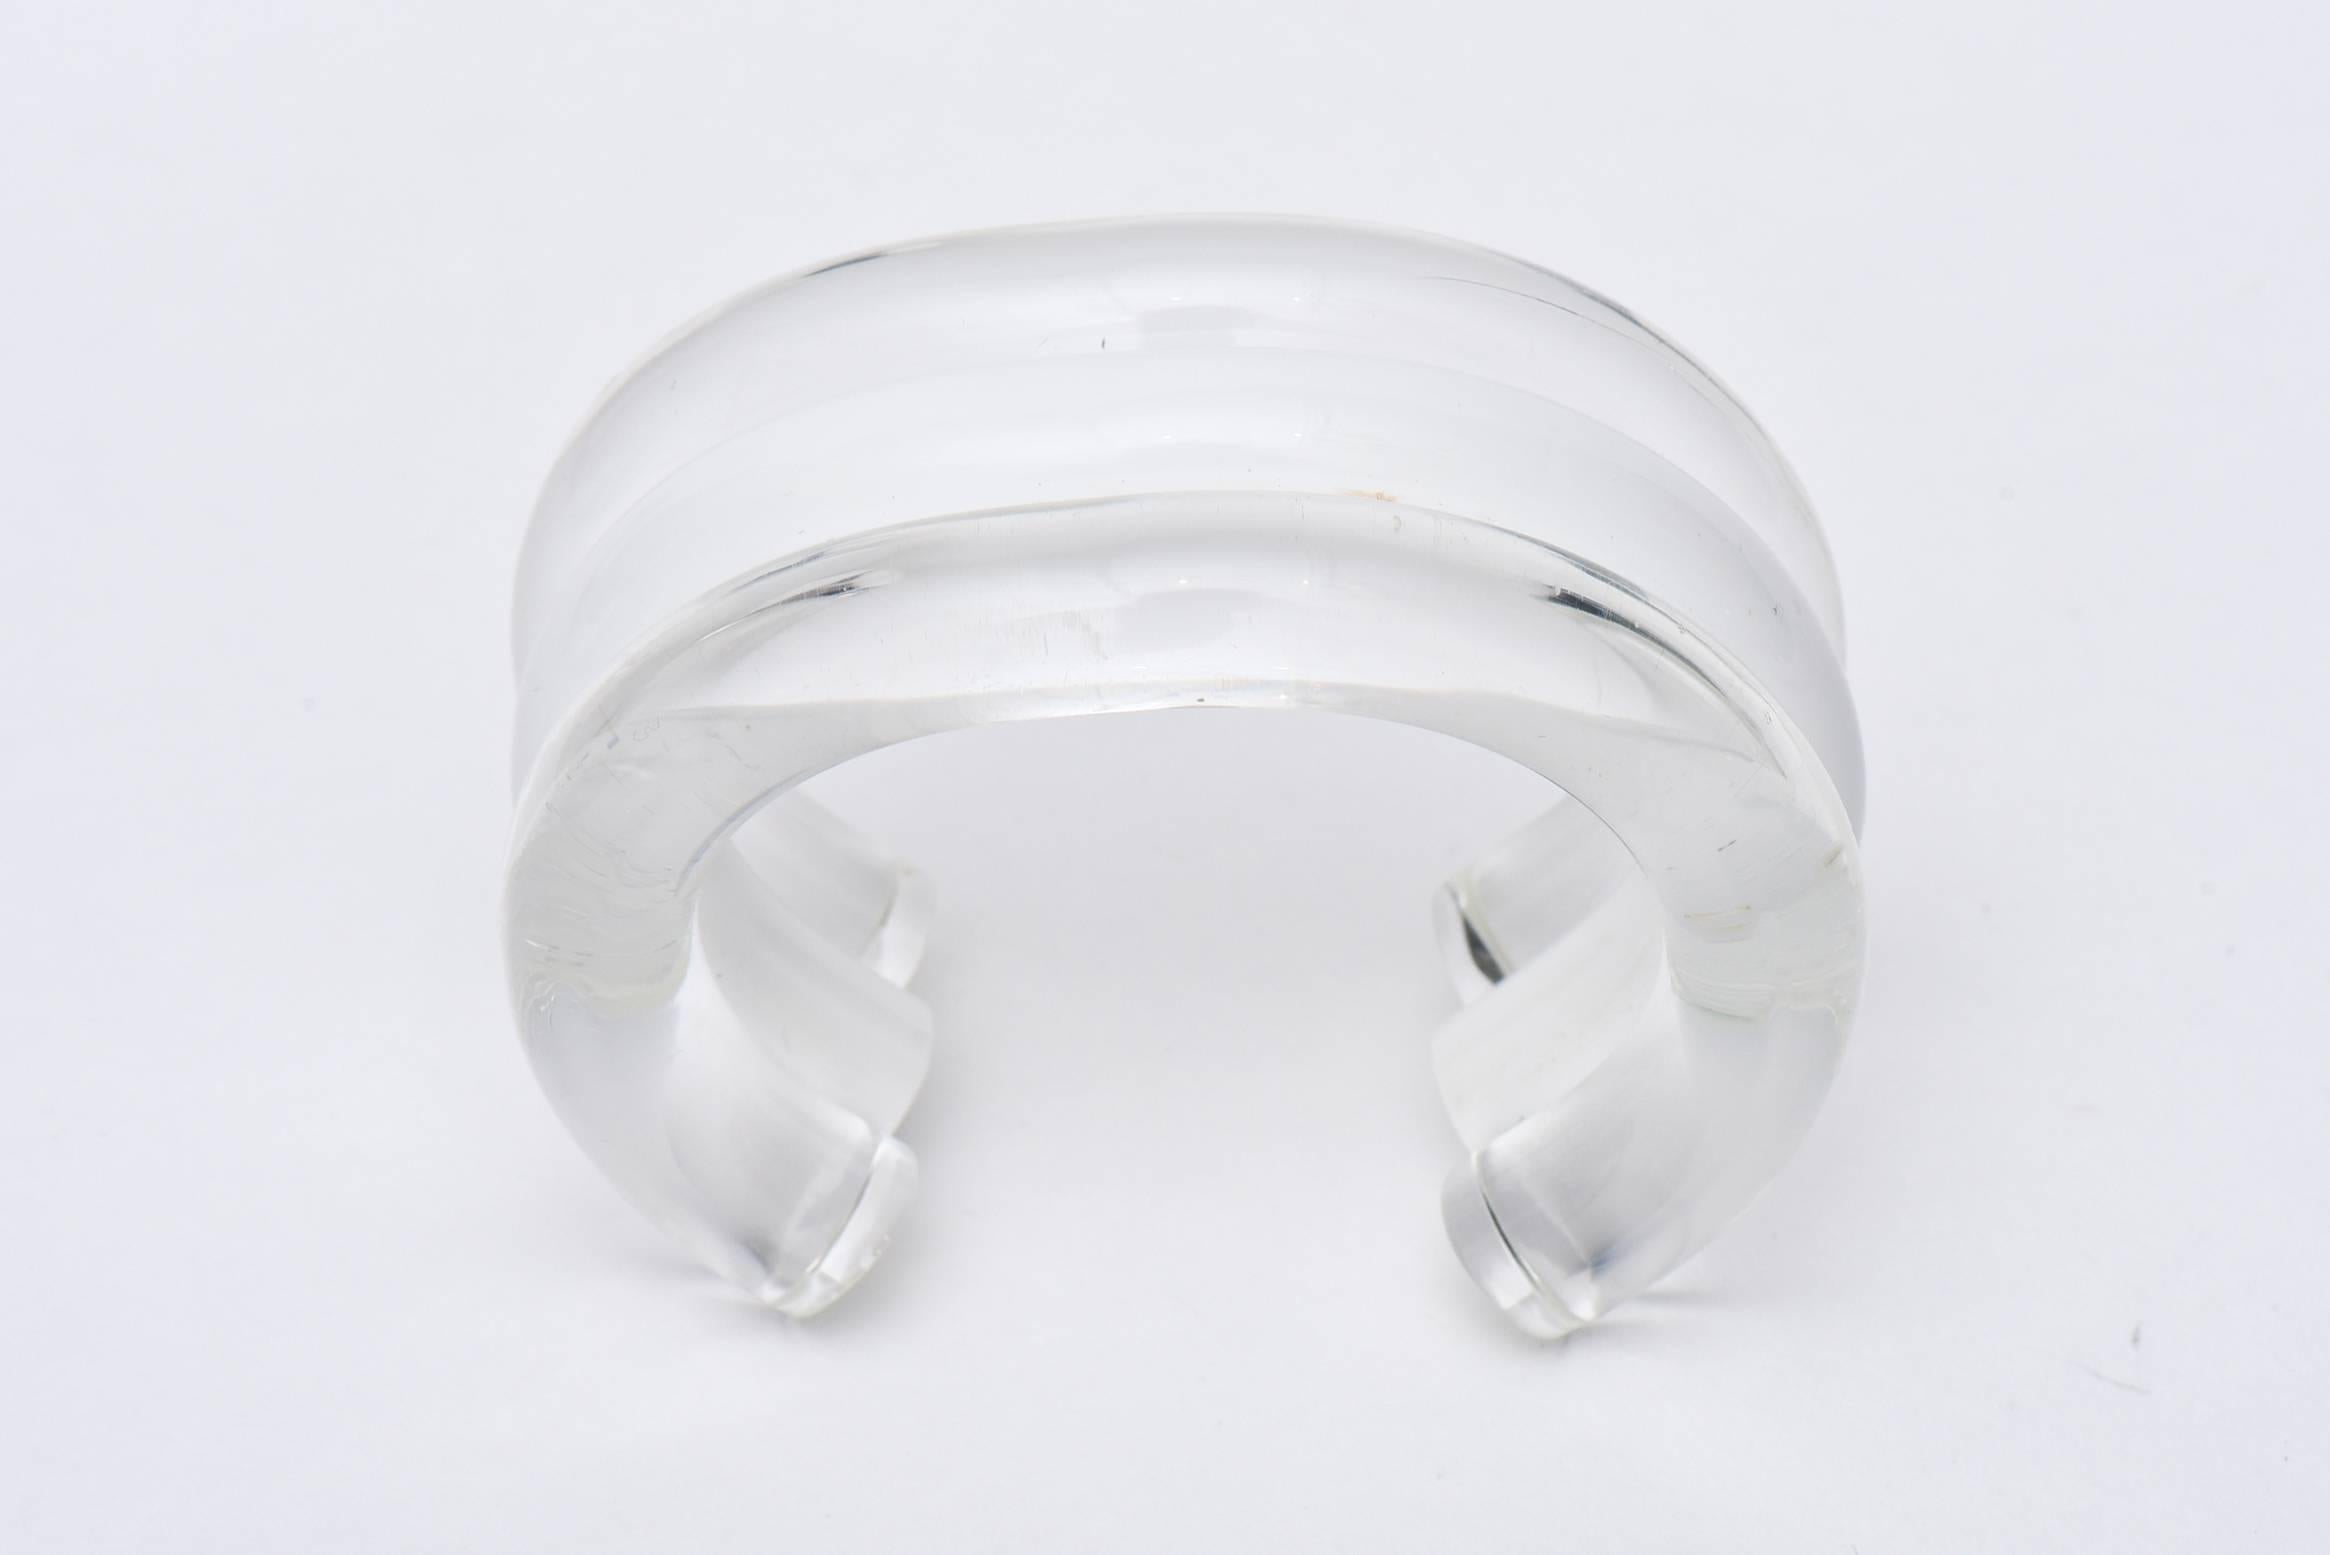 The bands of clear, white and then clear again make this very chic chunky lucite cuff bracelet from the 80's so wearable and fun! It is designed by a famous Californian artist named Judith Hendler who worked in plastic jewelry at the time. This will